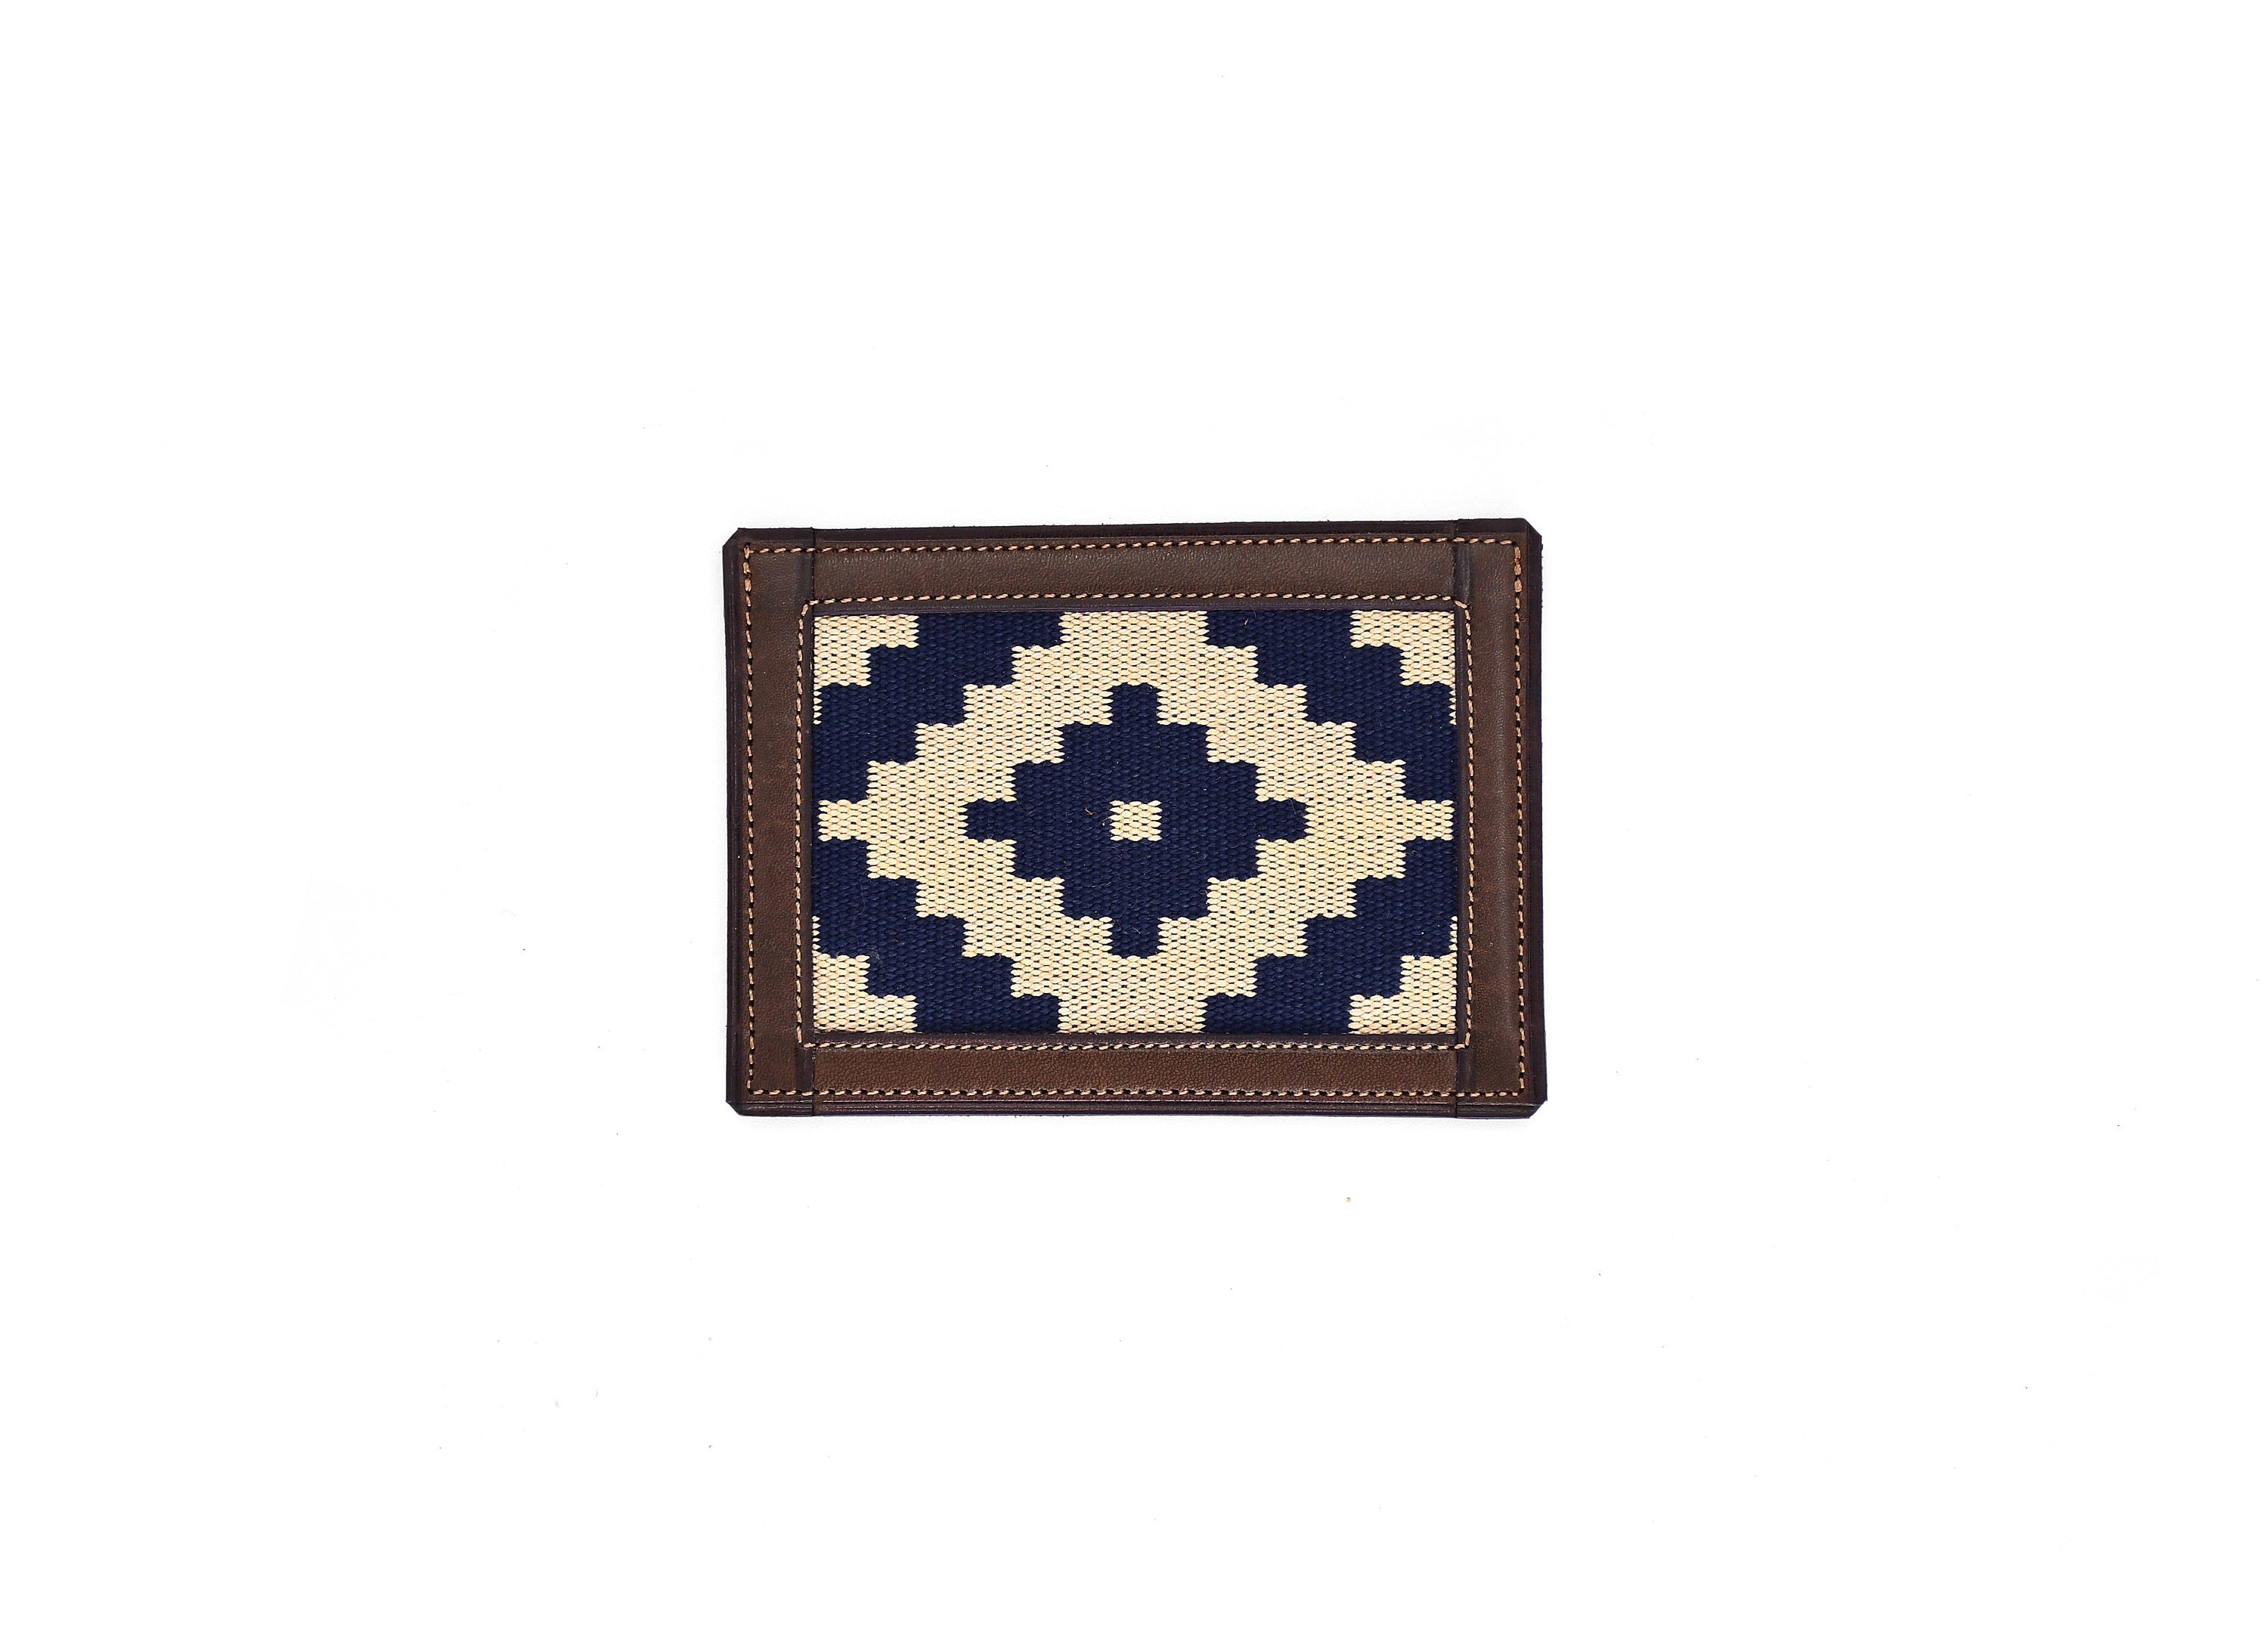 Gaucholife Wallet Brown Thin Woven Leather Card Holder (Blue)